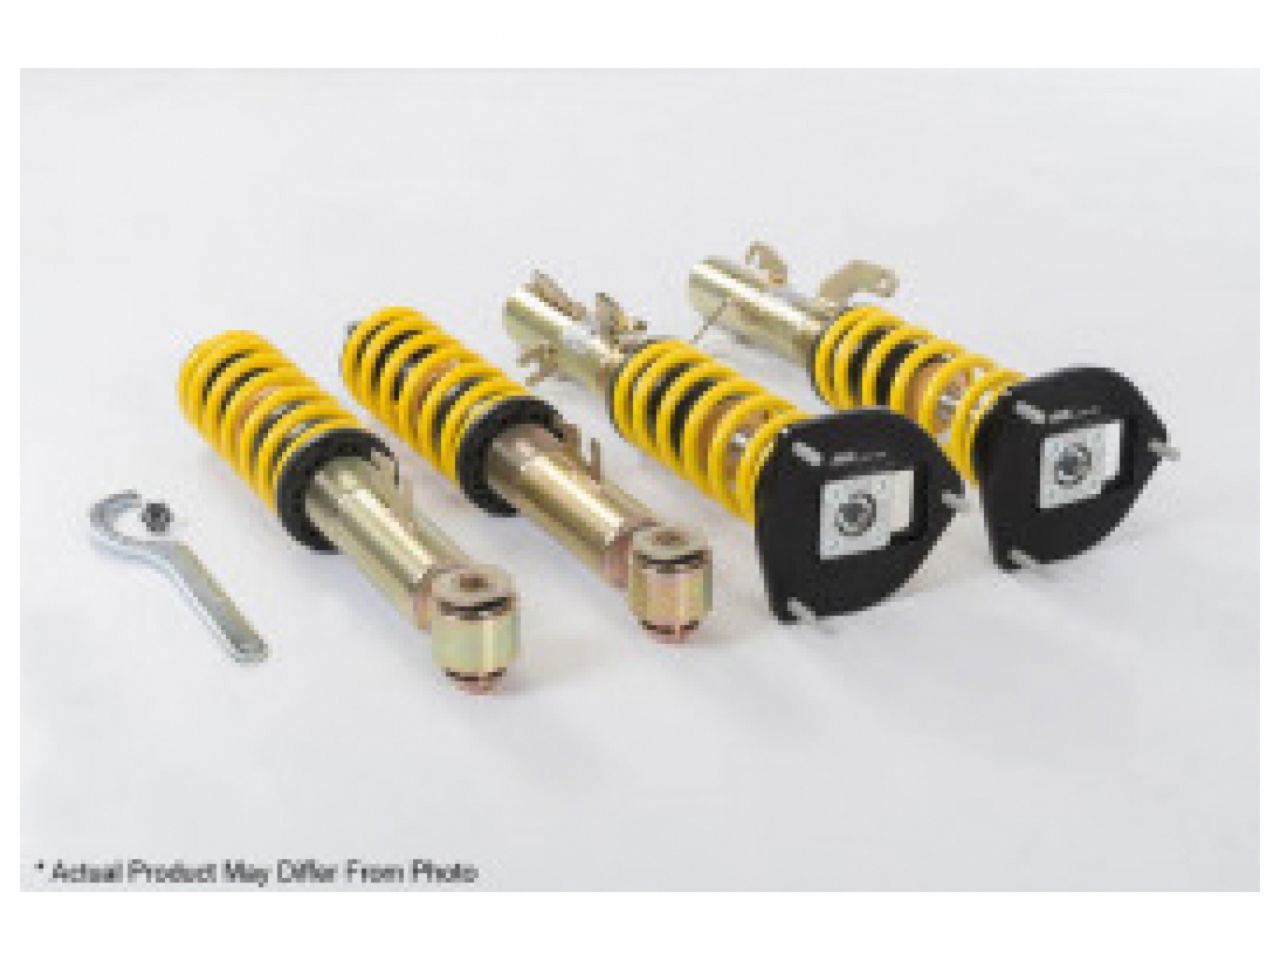 ST Suspensions Coilover Kits 96002 Item Image